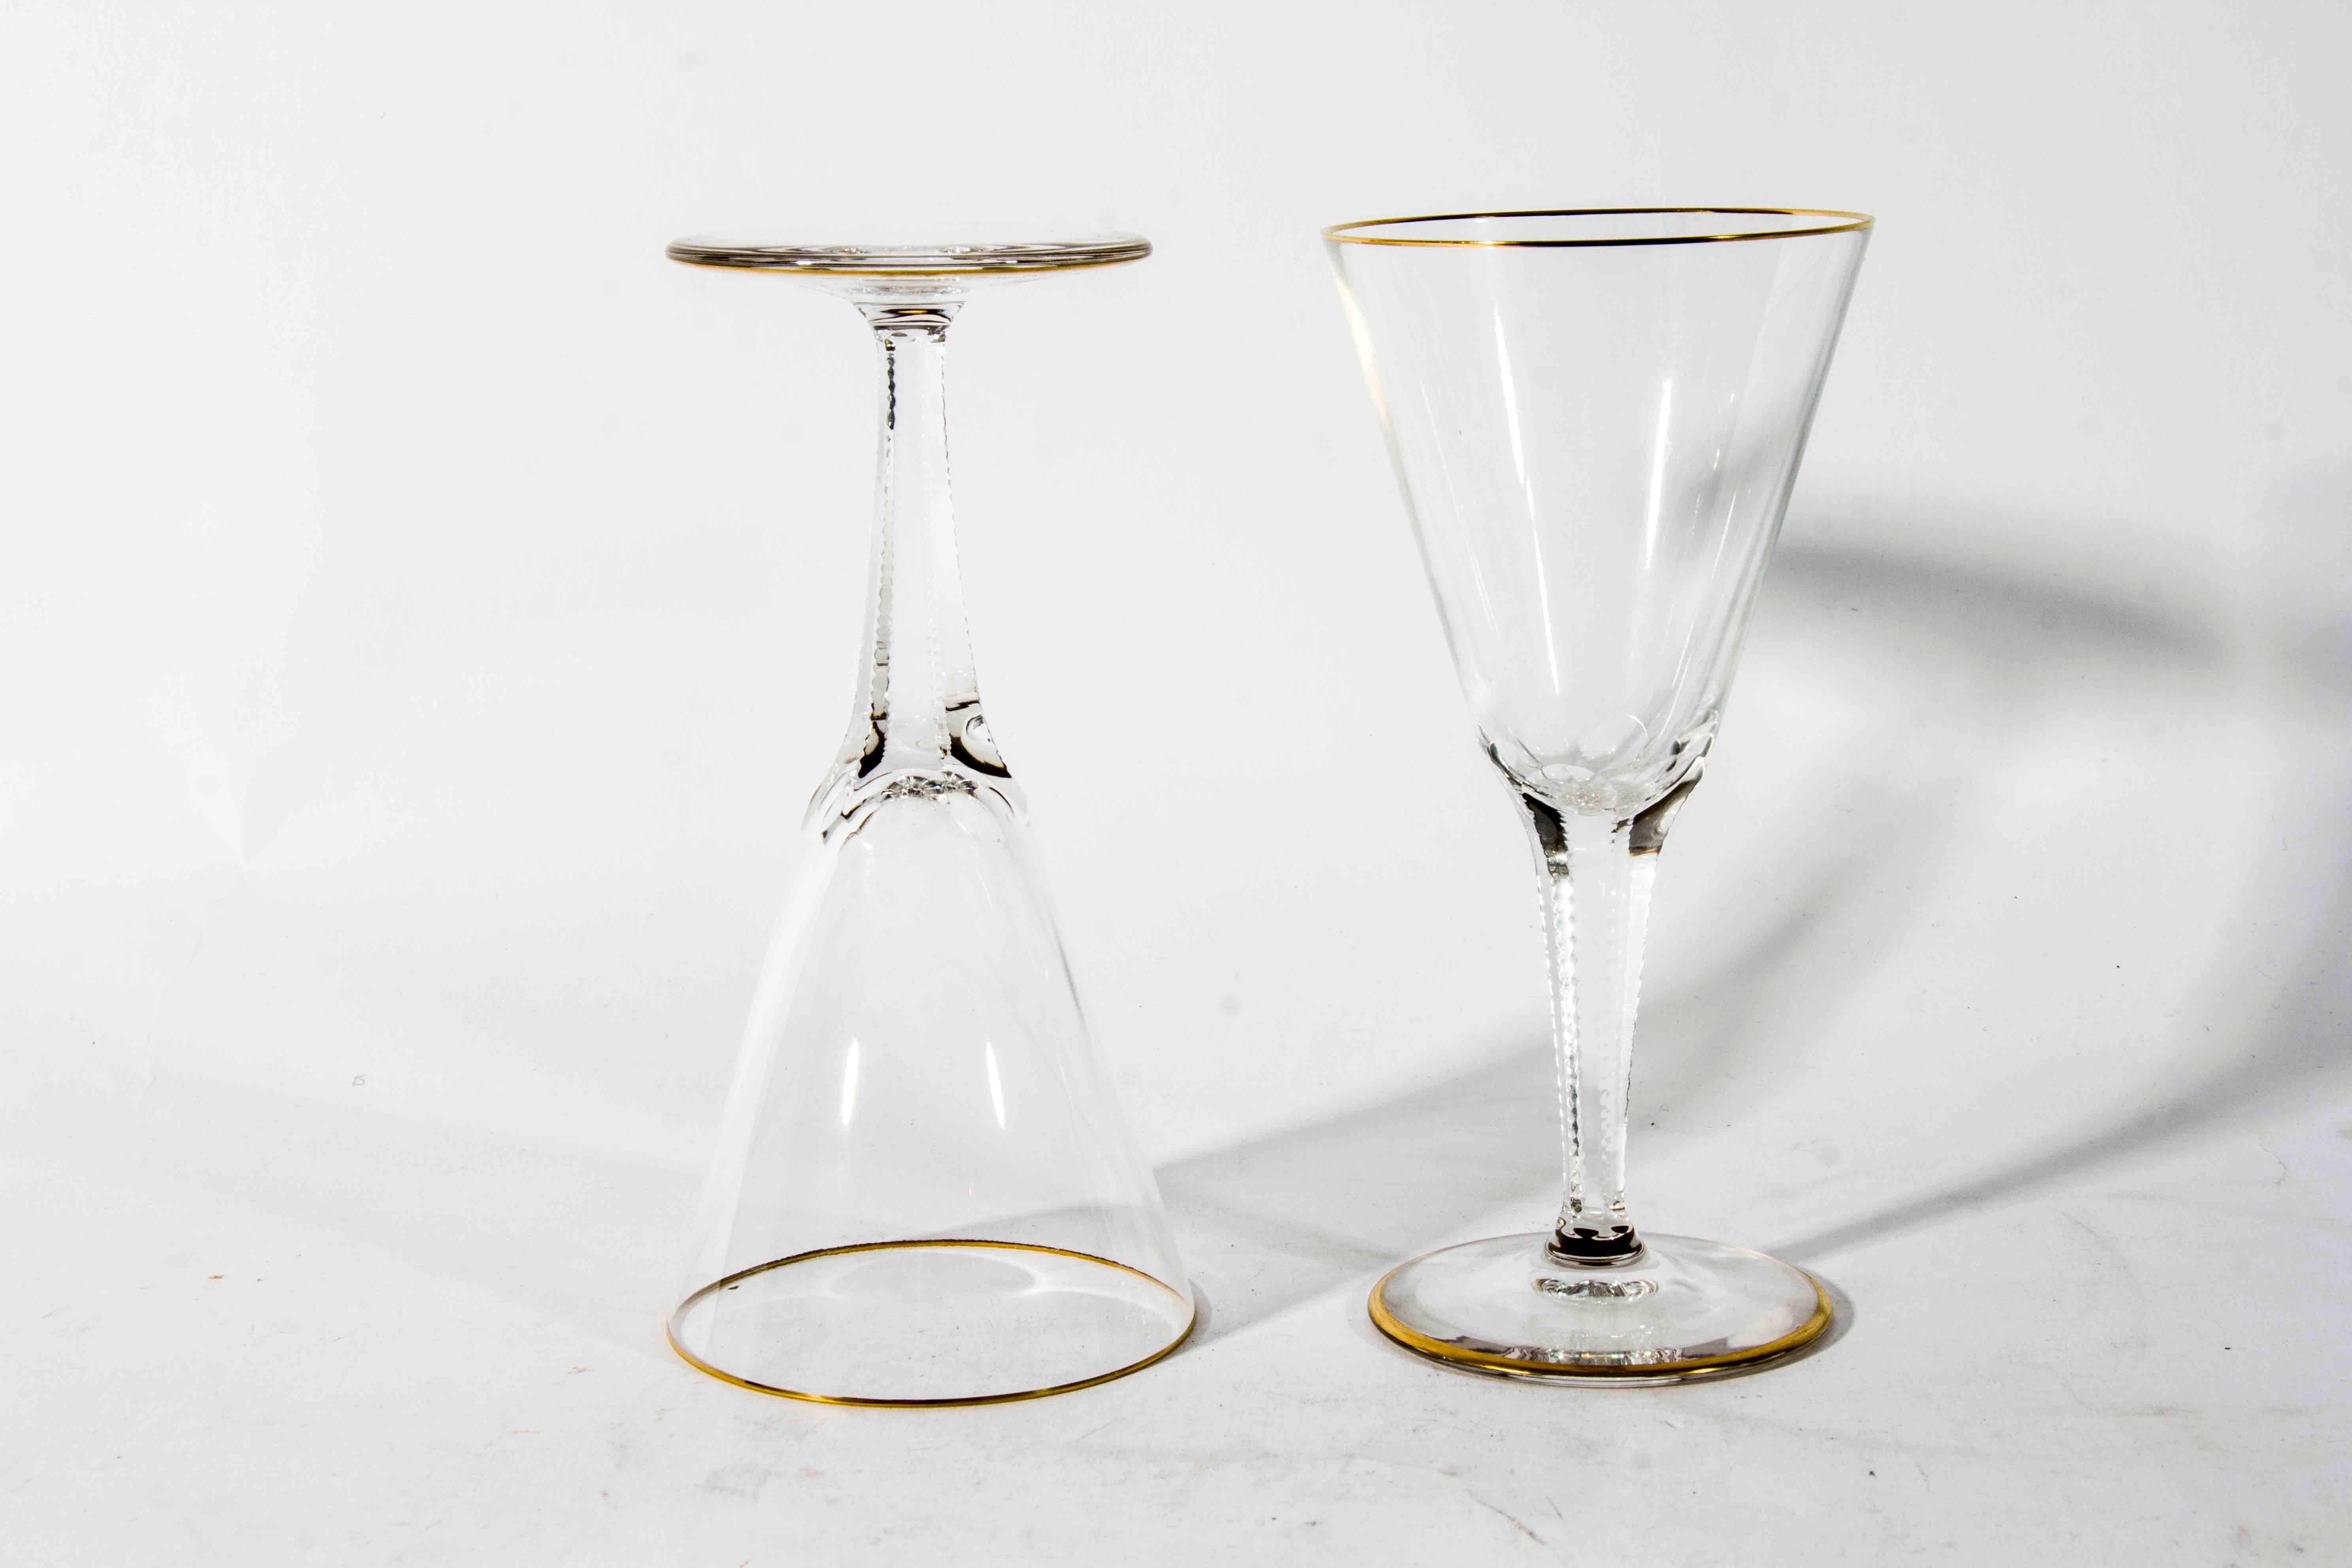 Antique set of crystal wine stamped glasses with gold trimmed top and base. The glasses are in excellent condition. The glasses measure 6.5 inches high X 3 inches diameter.